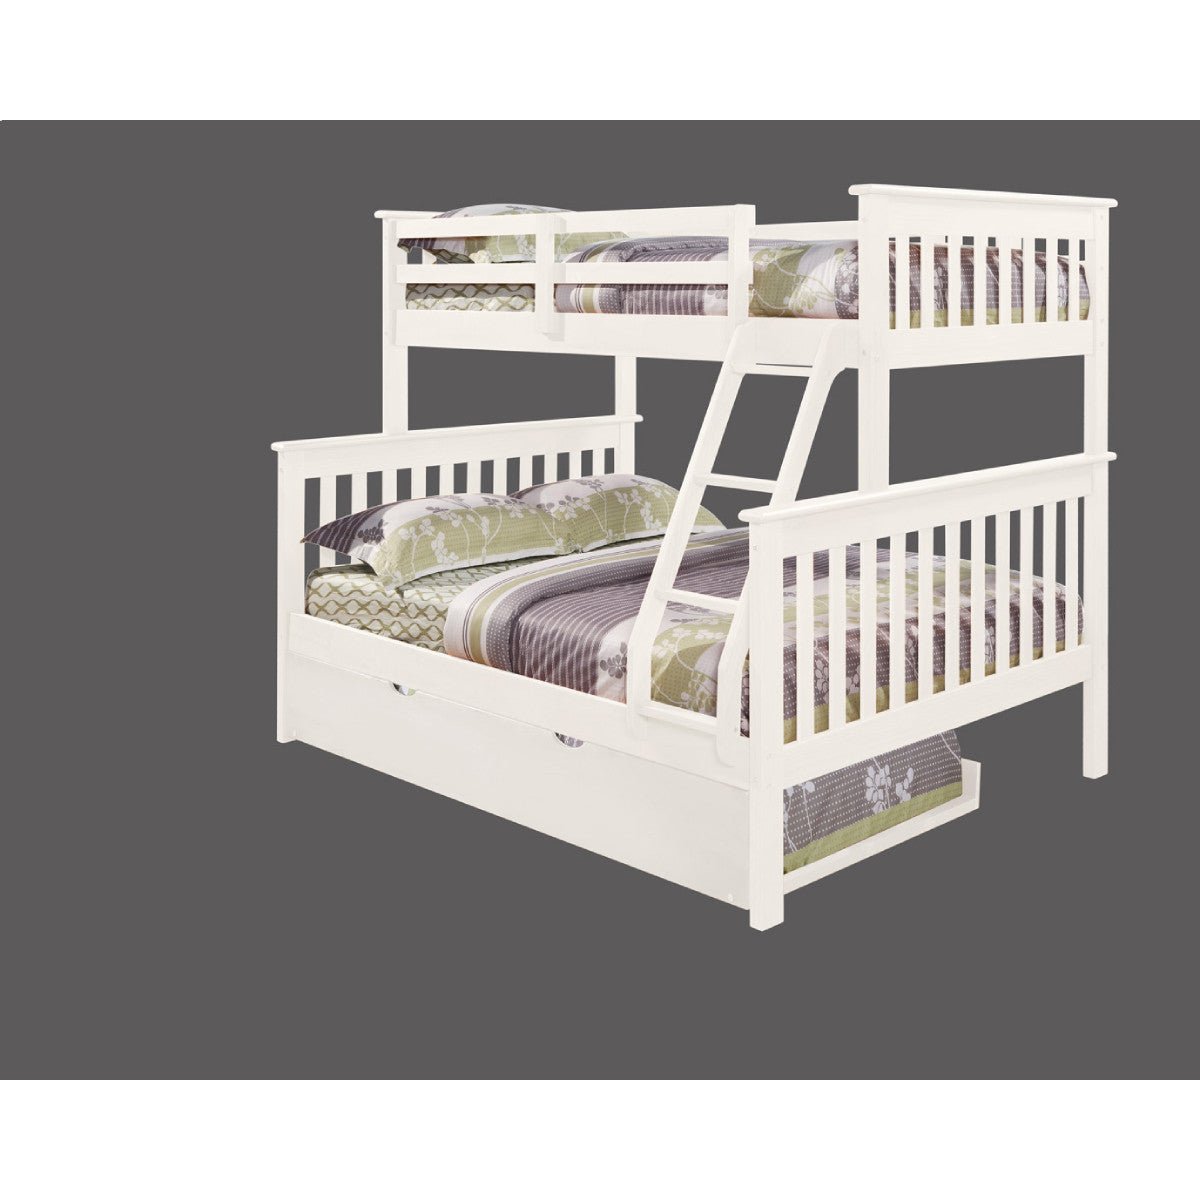 TWIN/FULL MISSION BUNK BED W/TWIN TRUNDLE BED IN WHITE FINISH